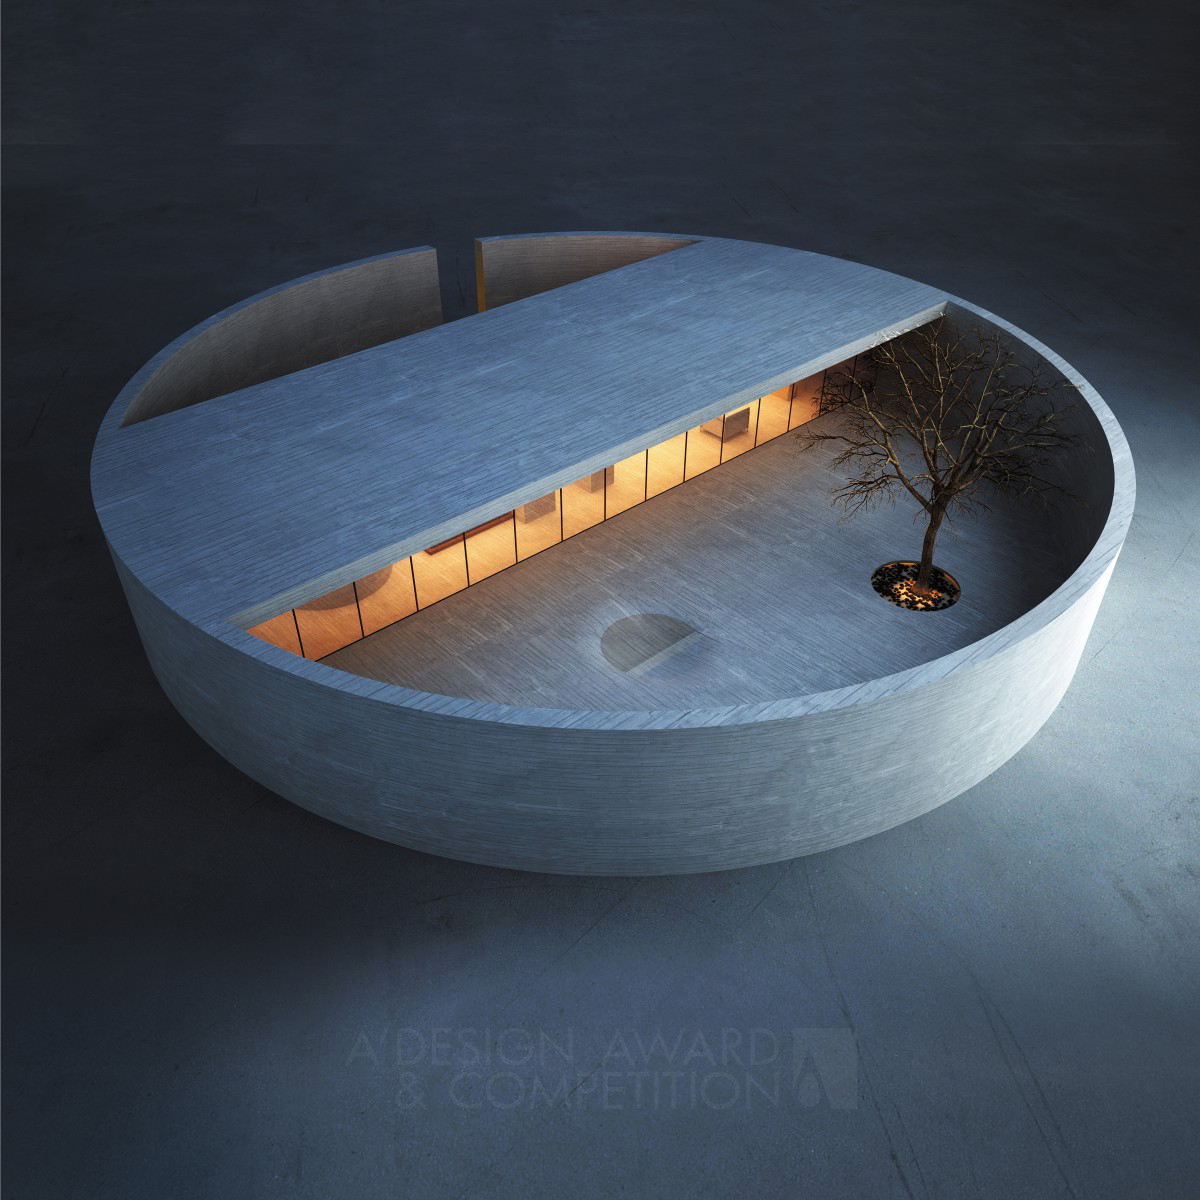 The Ring House & Atelier by Marwan Zgheib Platinum Architecture, Building and Structure Design Award Winner 2014 